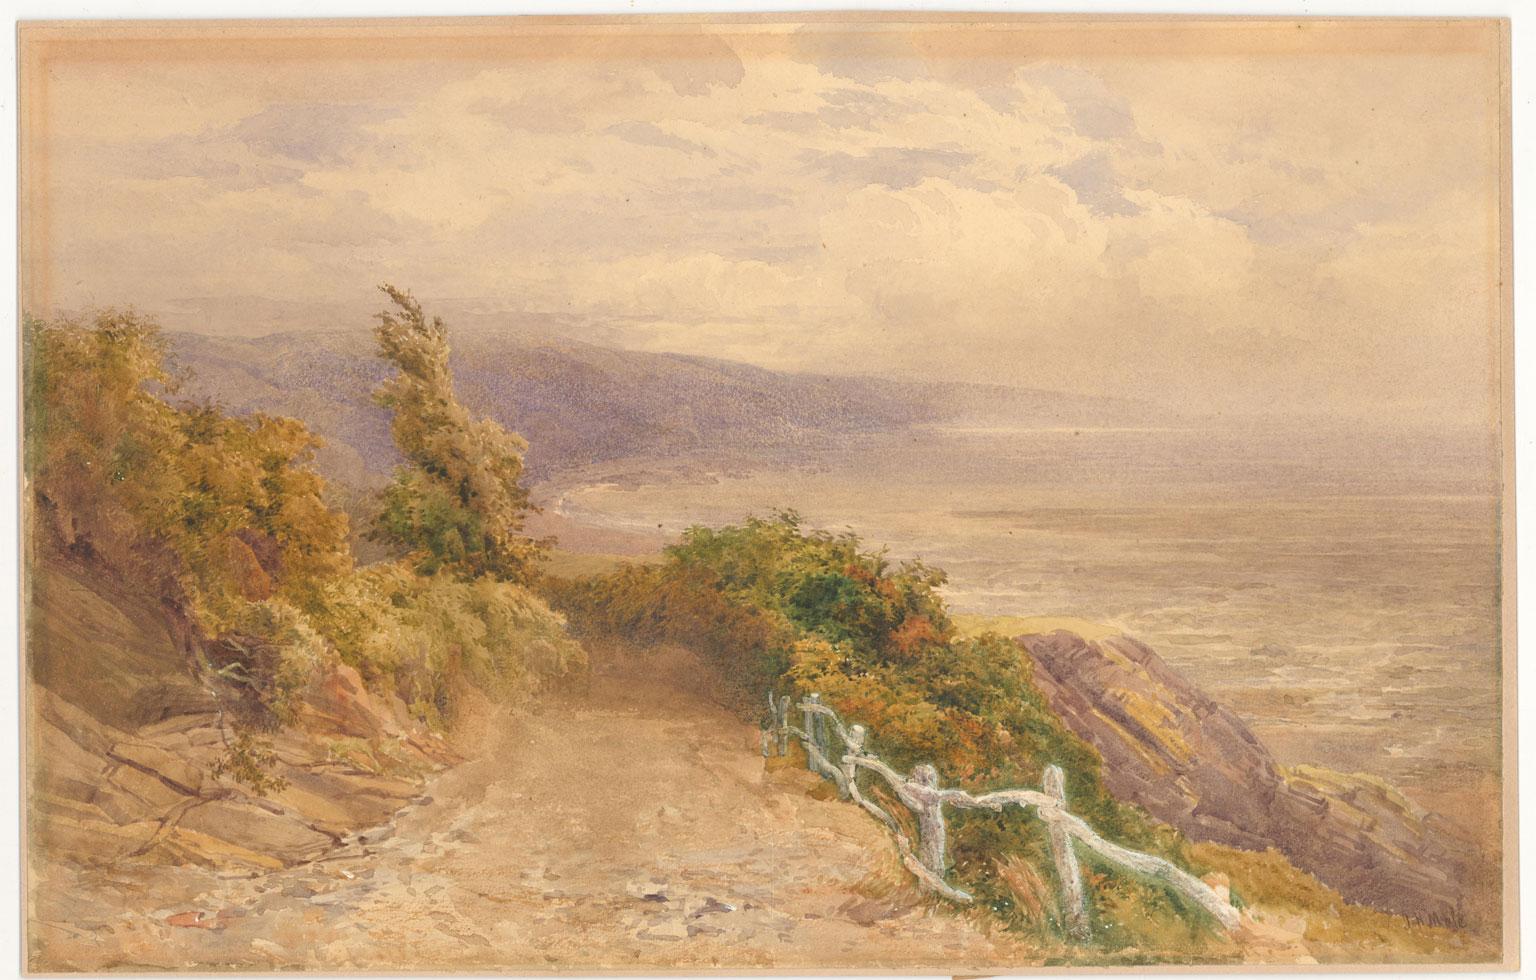 A very fine 19th century watercolour by the English artist John Henry Mole (1814-1886), who originally trained as a miniature artist. Mole has depicted an expansive coastal landscape on a blustery Autumn day. His detailed approach to the composition